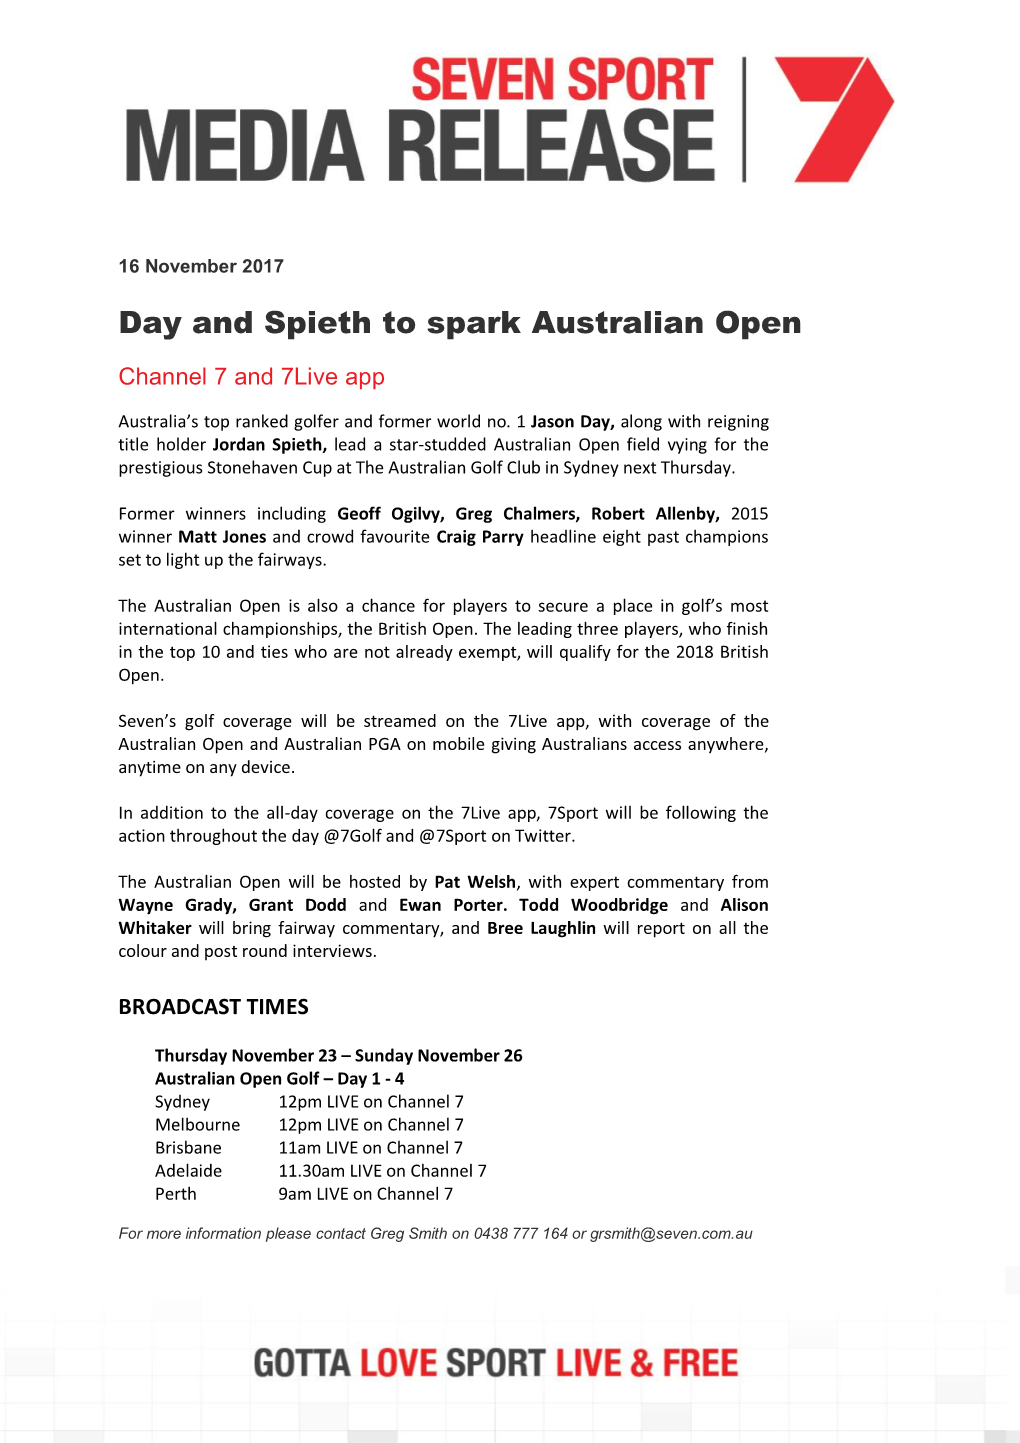 Day and Spieth to Spark Australian Open on Seven